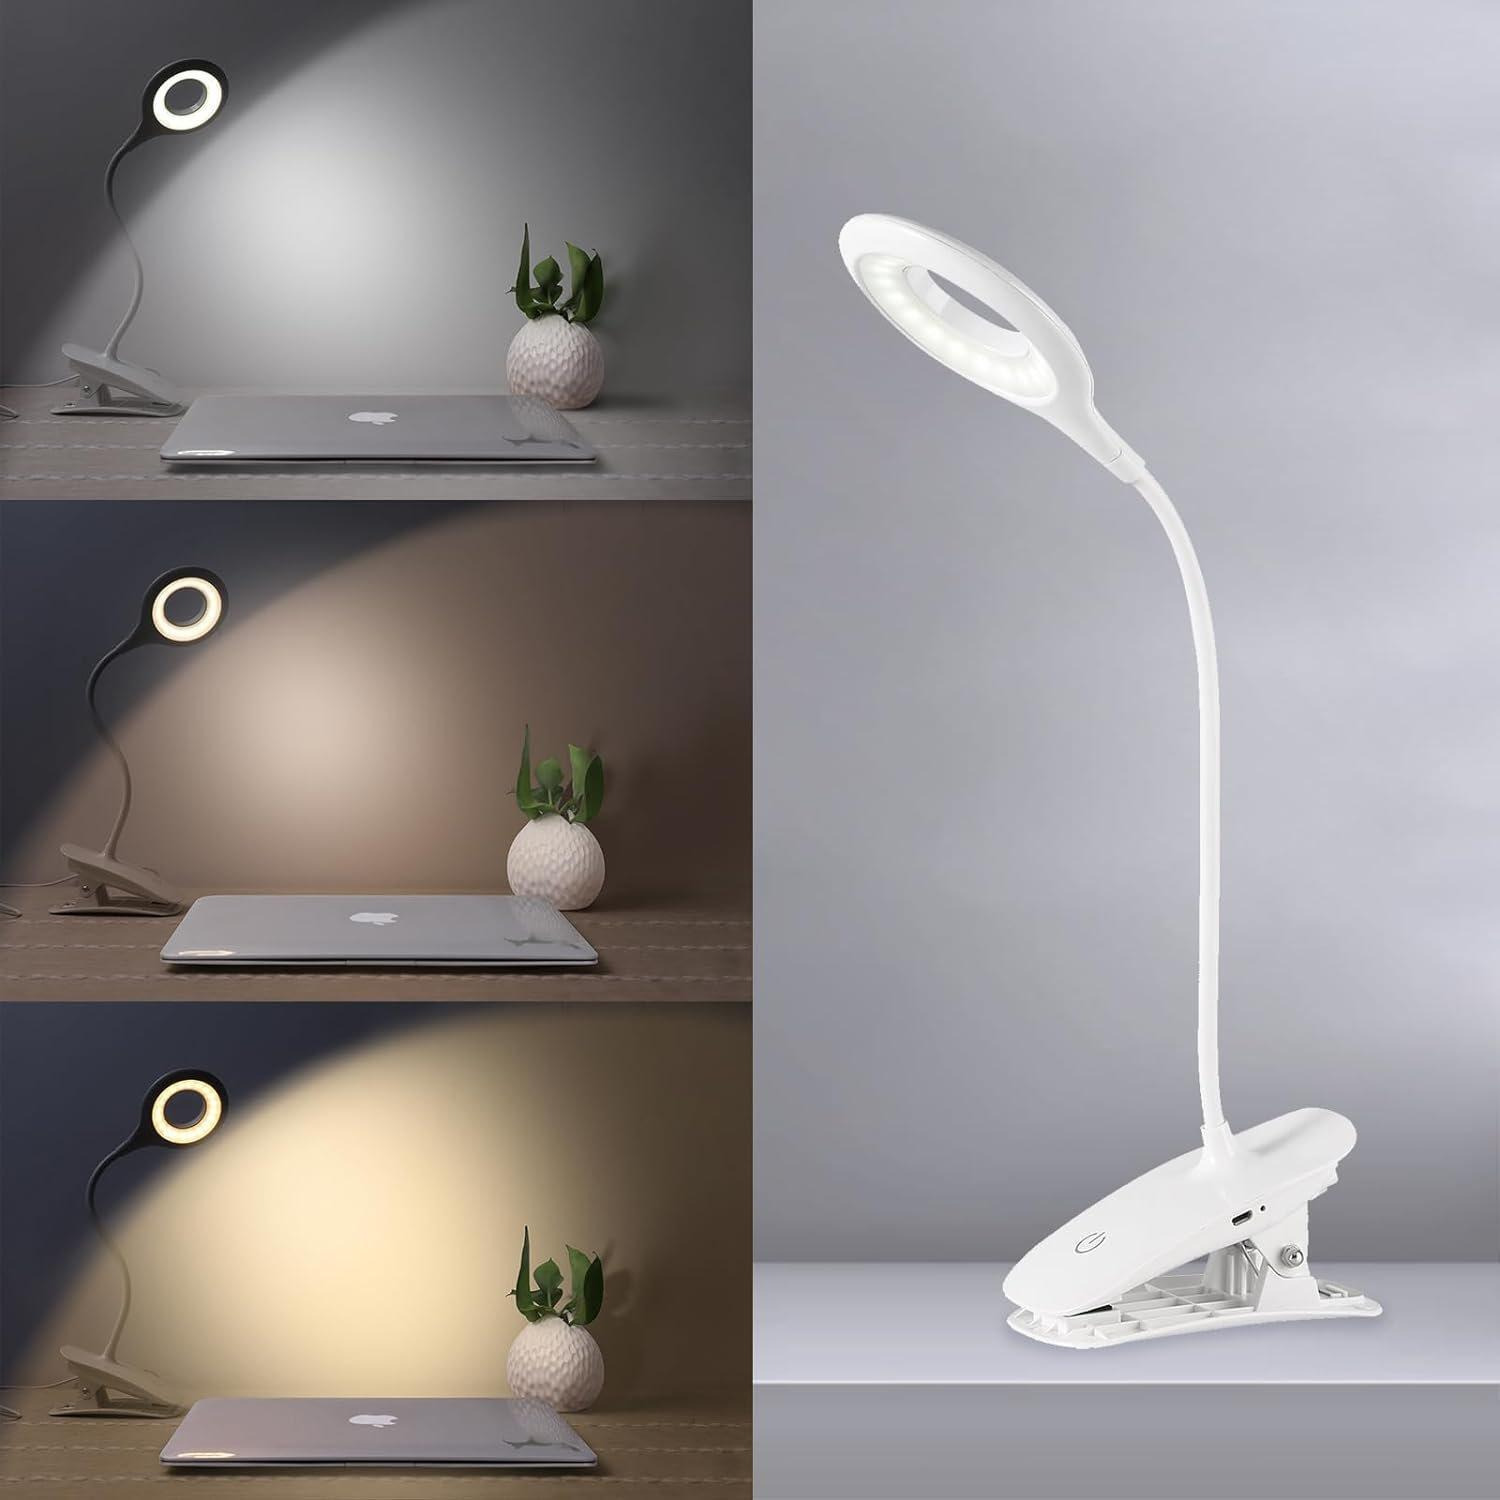 3W Clip-On Reading Light, Powered by USB with Touch Control, Dimmable brightness lamp 3 Colour Temperature - image 1